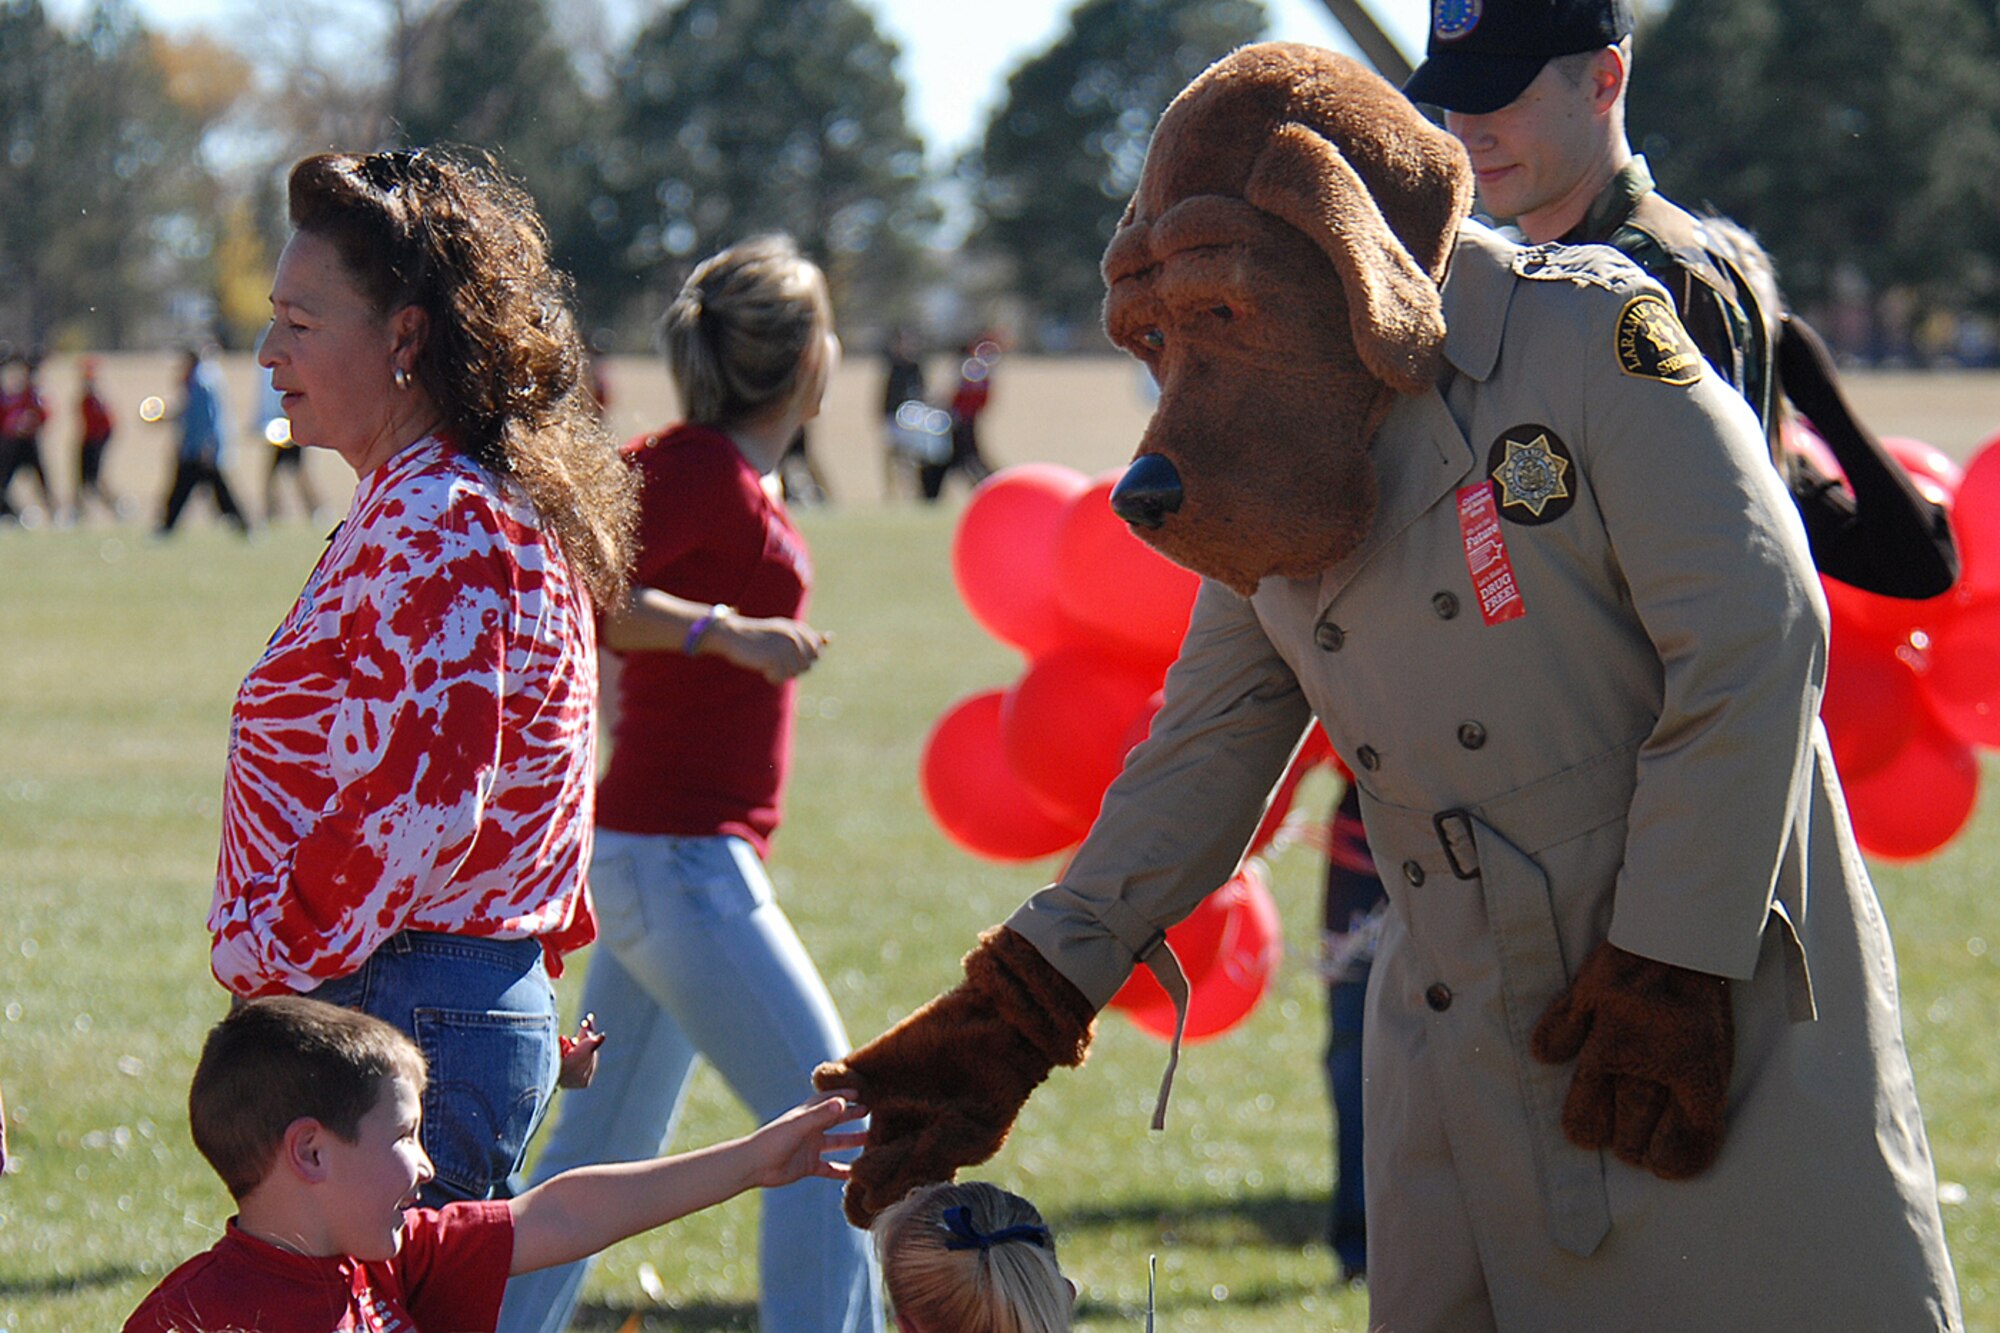 Chase Chadick, a 1st grader at Freedom Elementary School, shakes McGruff the Crime Dog’s hand, played by Senior Airman Armando Geneyro, 90th Mission Operations Squadron, during the Red Ribbon Week parade here. McGruff the Crime Dog is a nationwide icon for crime prevention.